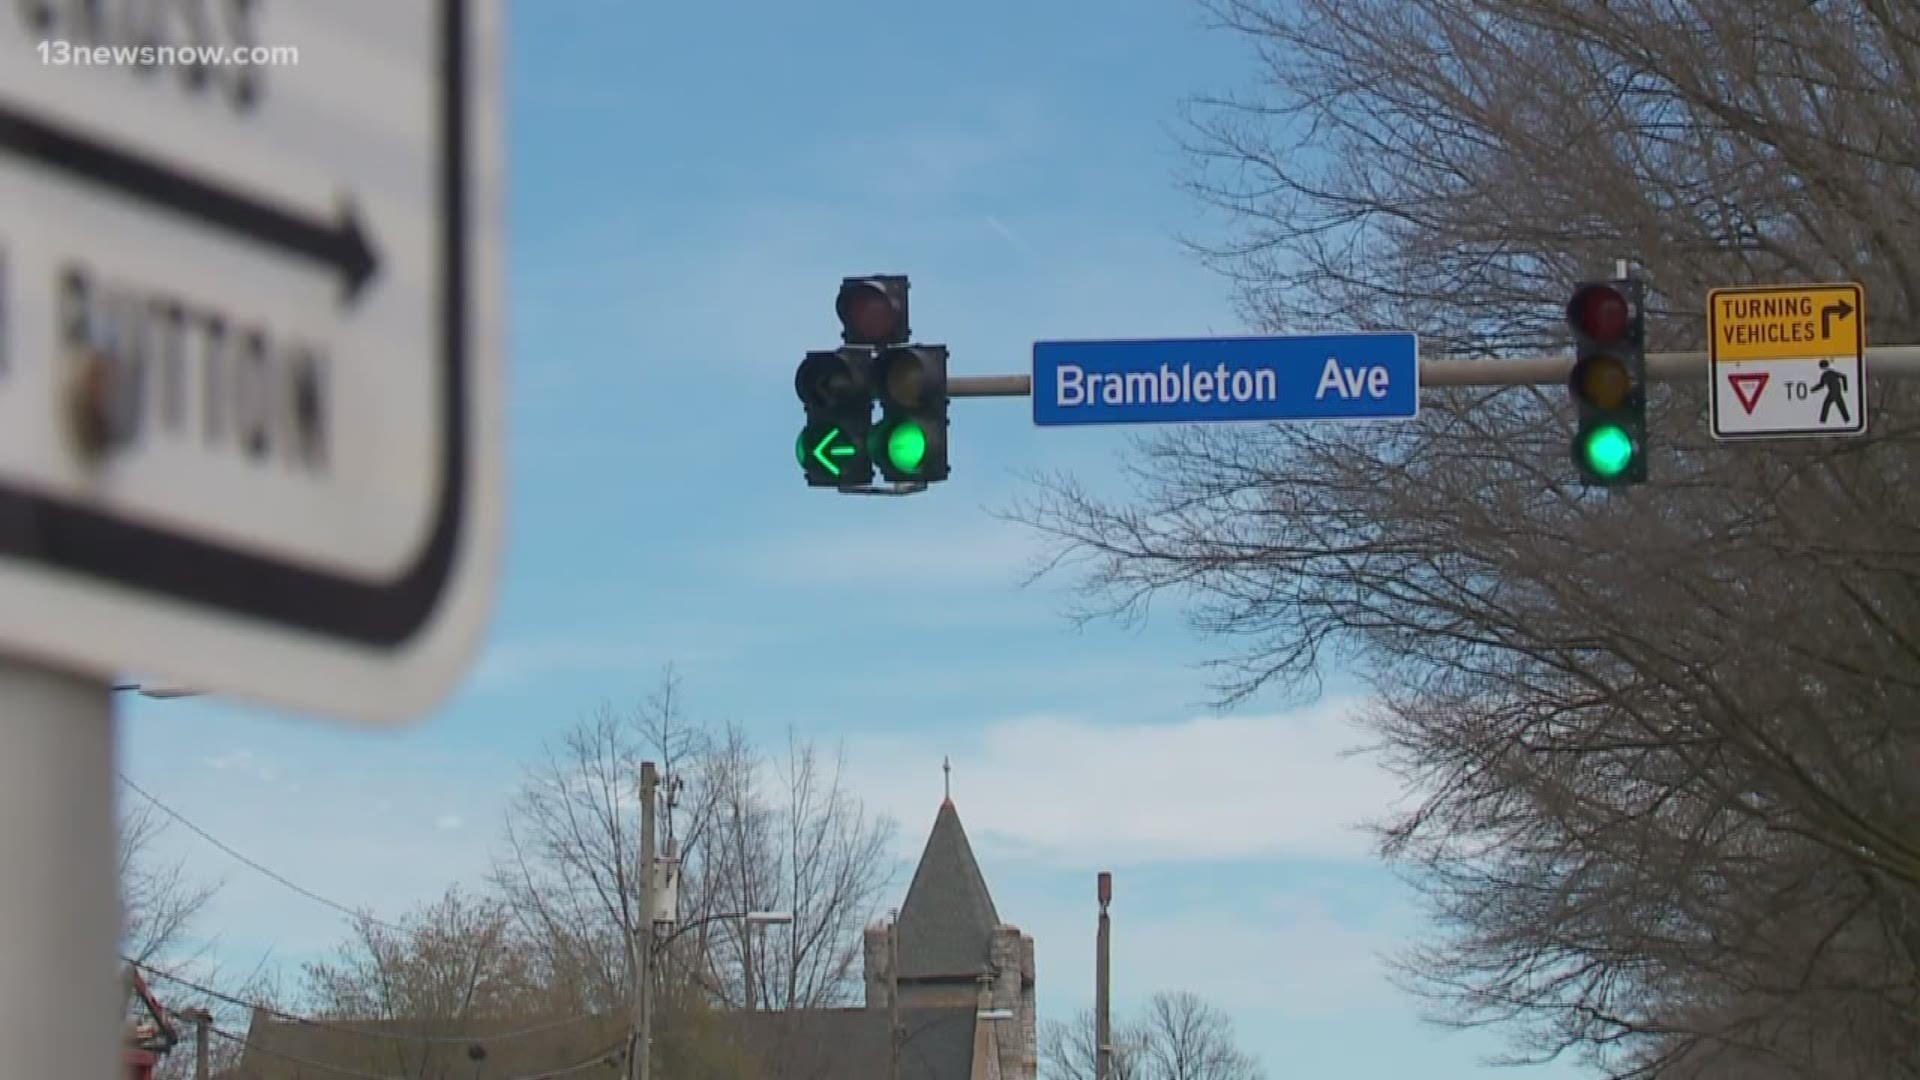 13News Now Ali Weatherton asked VDOT officials about the study they're conducting at I-264 and Brambleton Avenue to examine safety and congestion there.